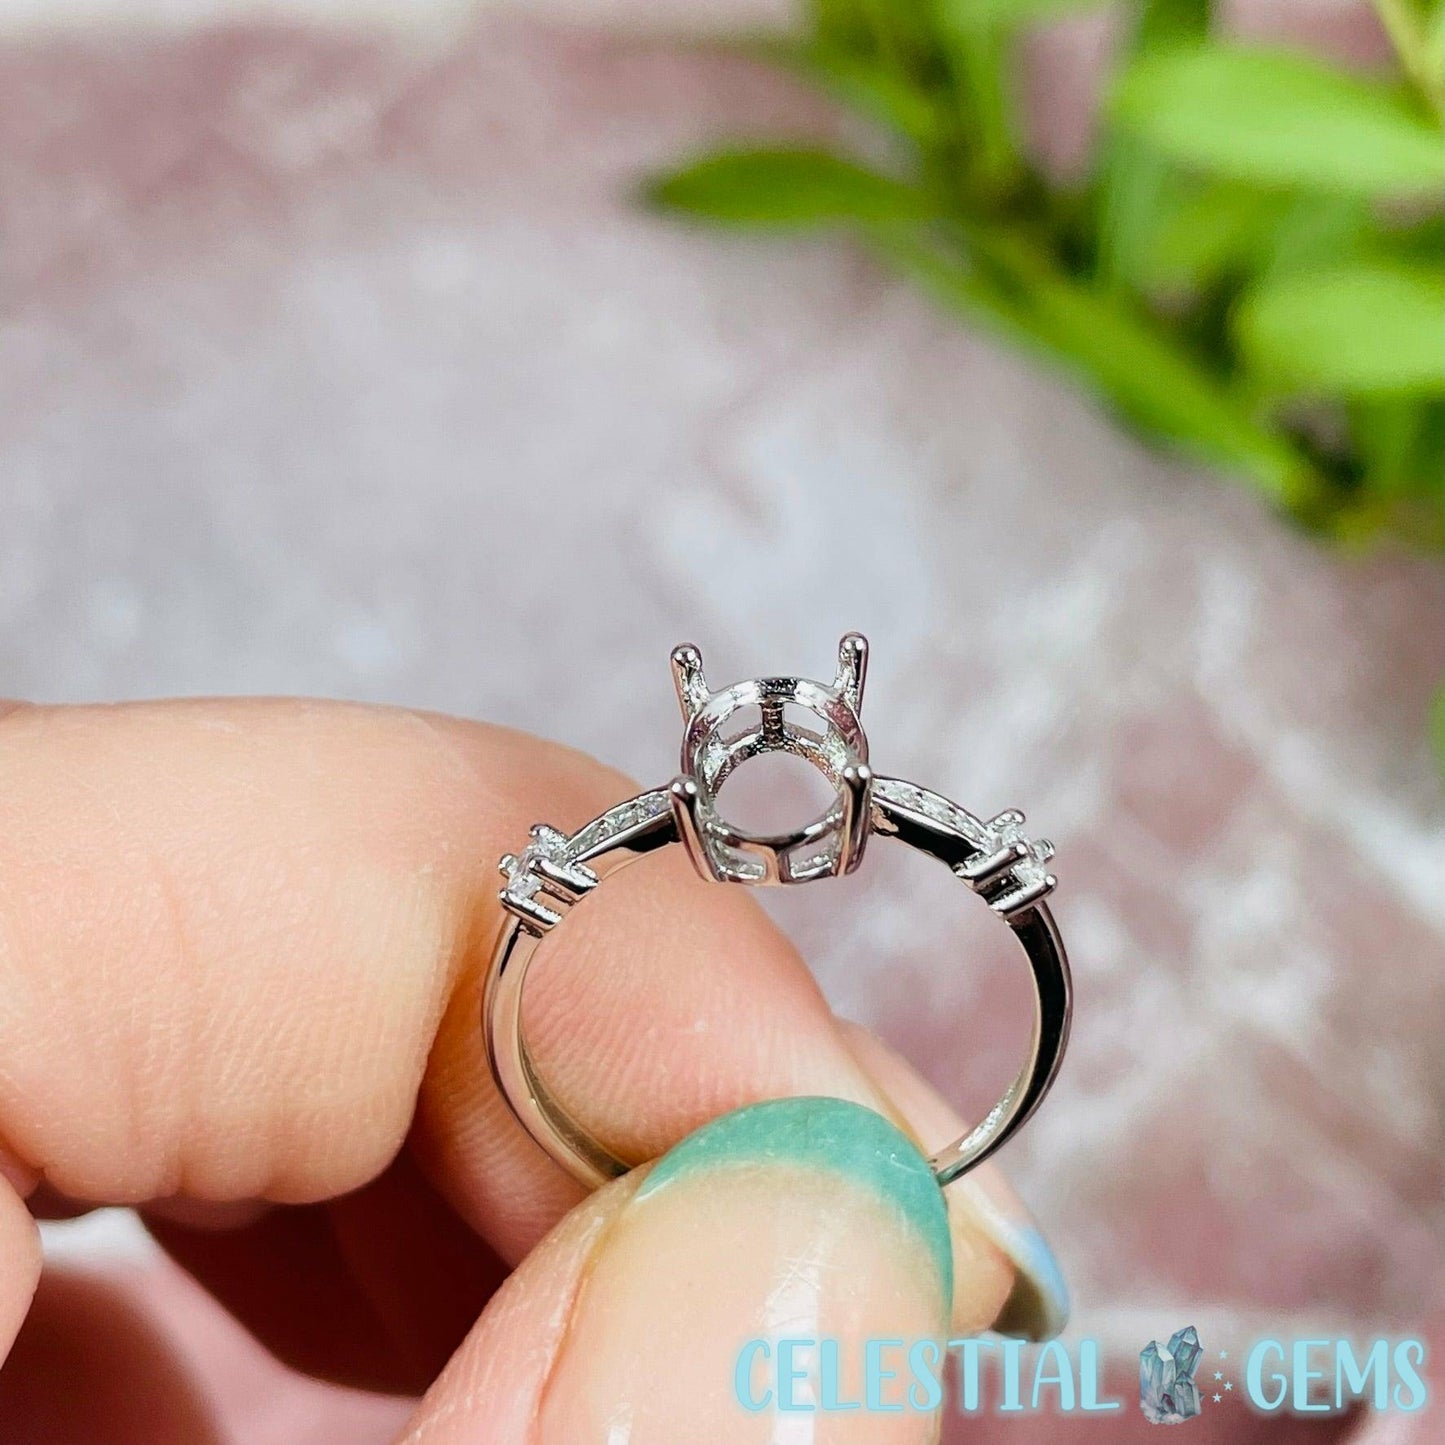 Blank 925 Silver Adjustable Ring for Mounting Cabochons